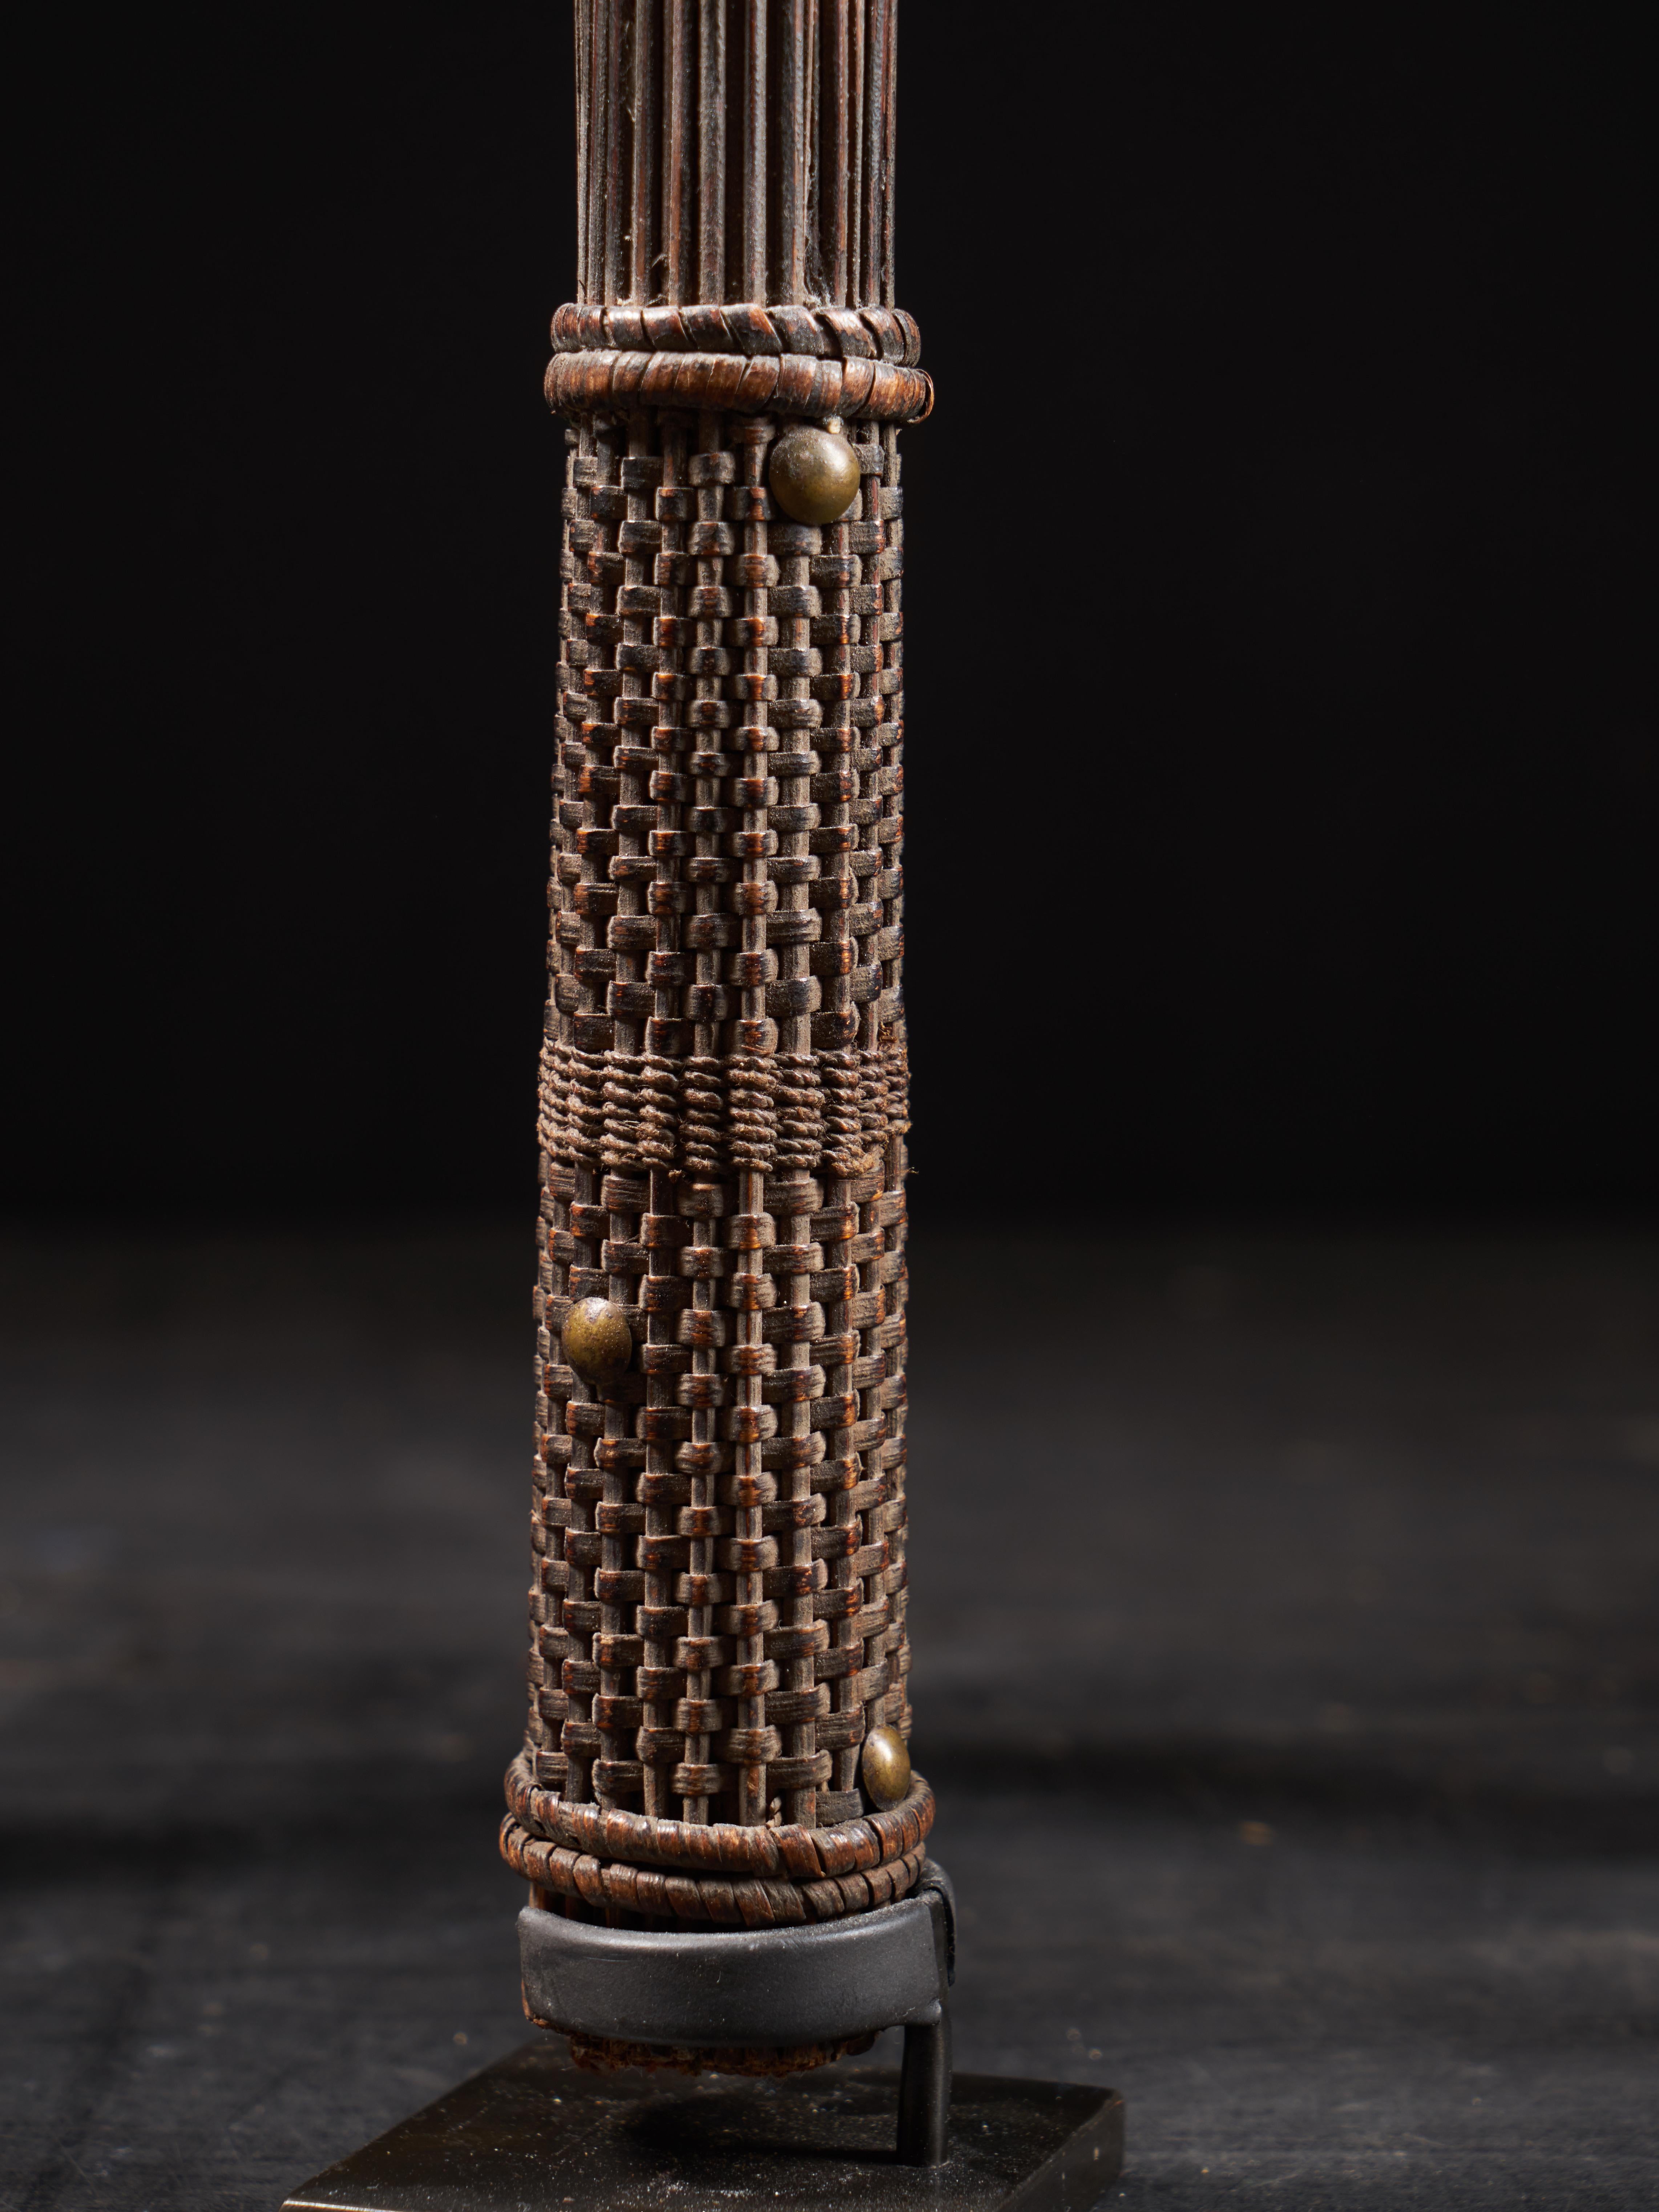 Ethno Design Mbole People, DRC, Chief Scepters Collection Made of Palmtree Leaf  For Sale 2